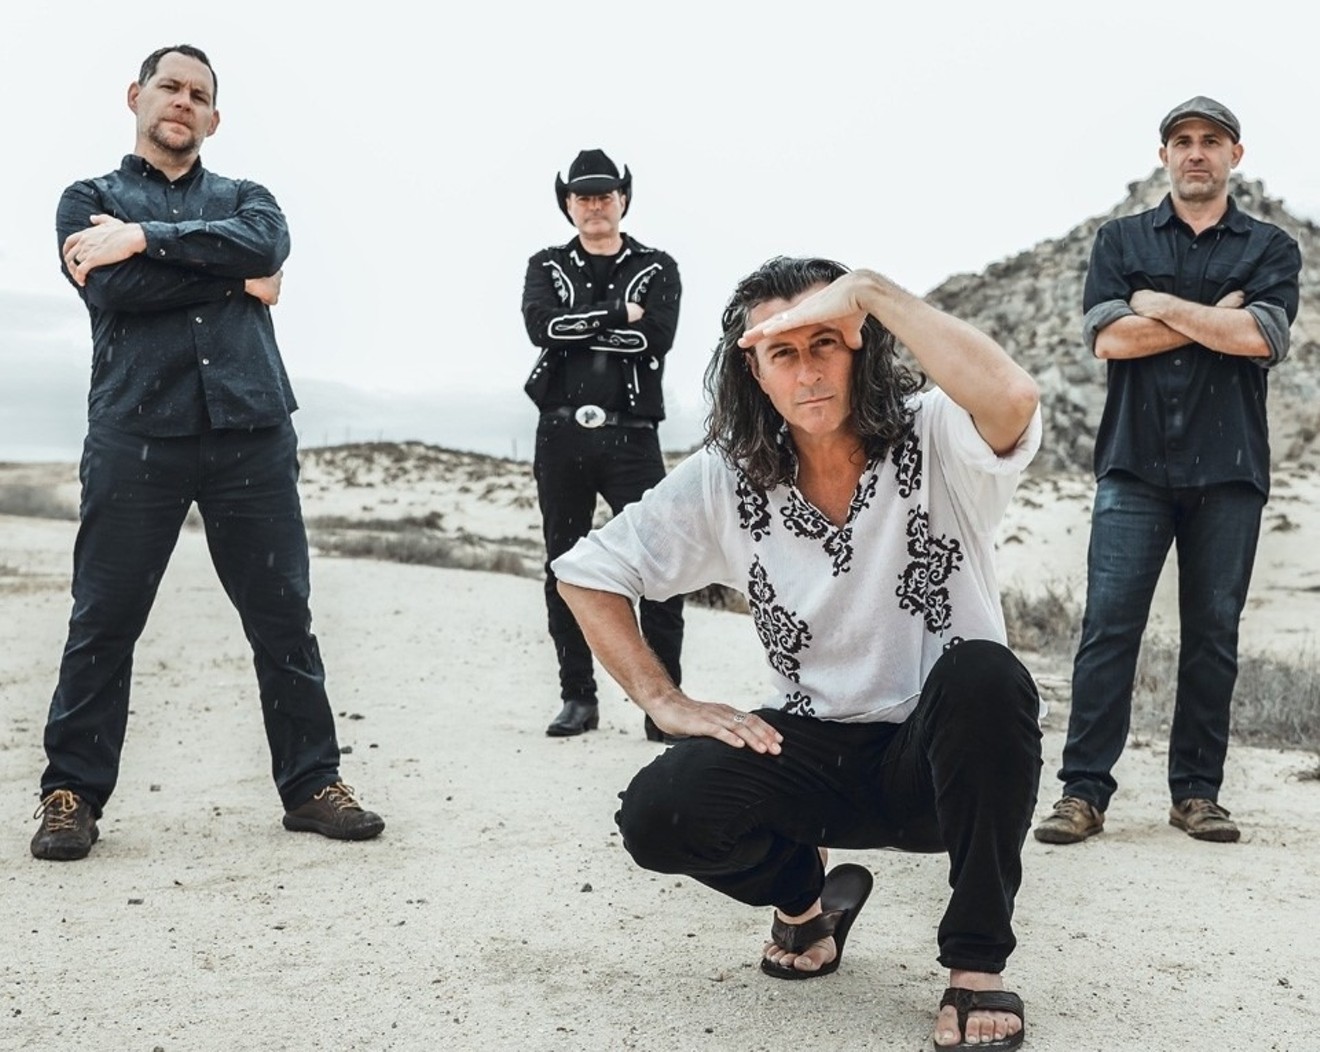 Roger Clyne and the Peacemakers will headline the inaugural Desert Sol Jam music festival on Saturday.